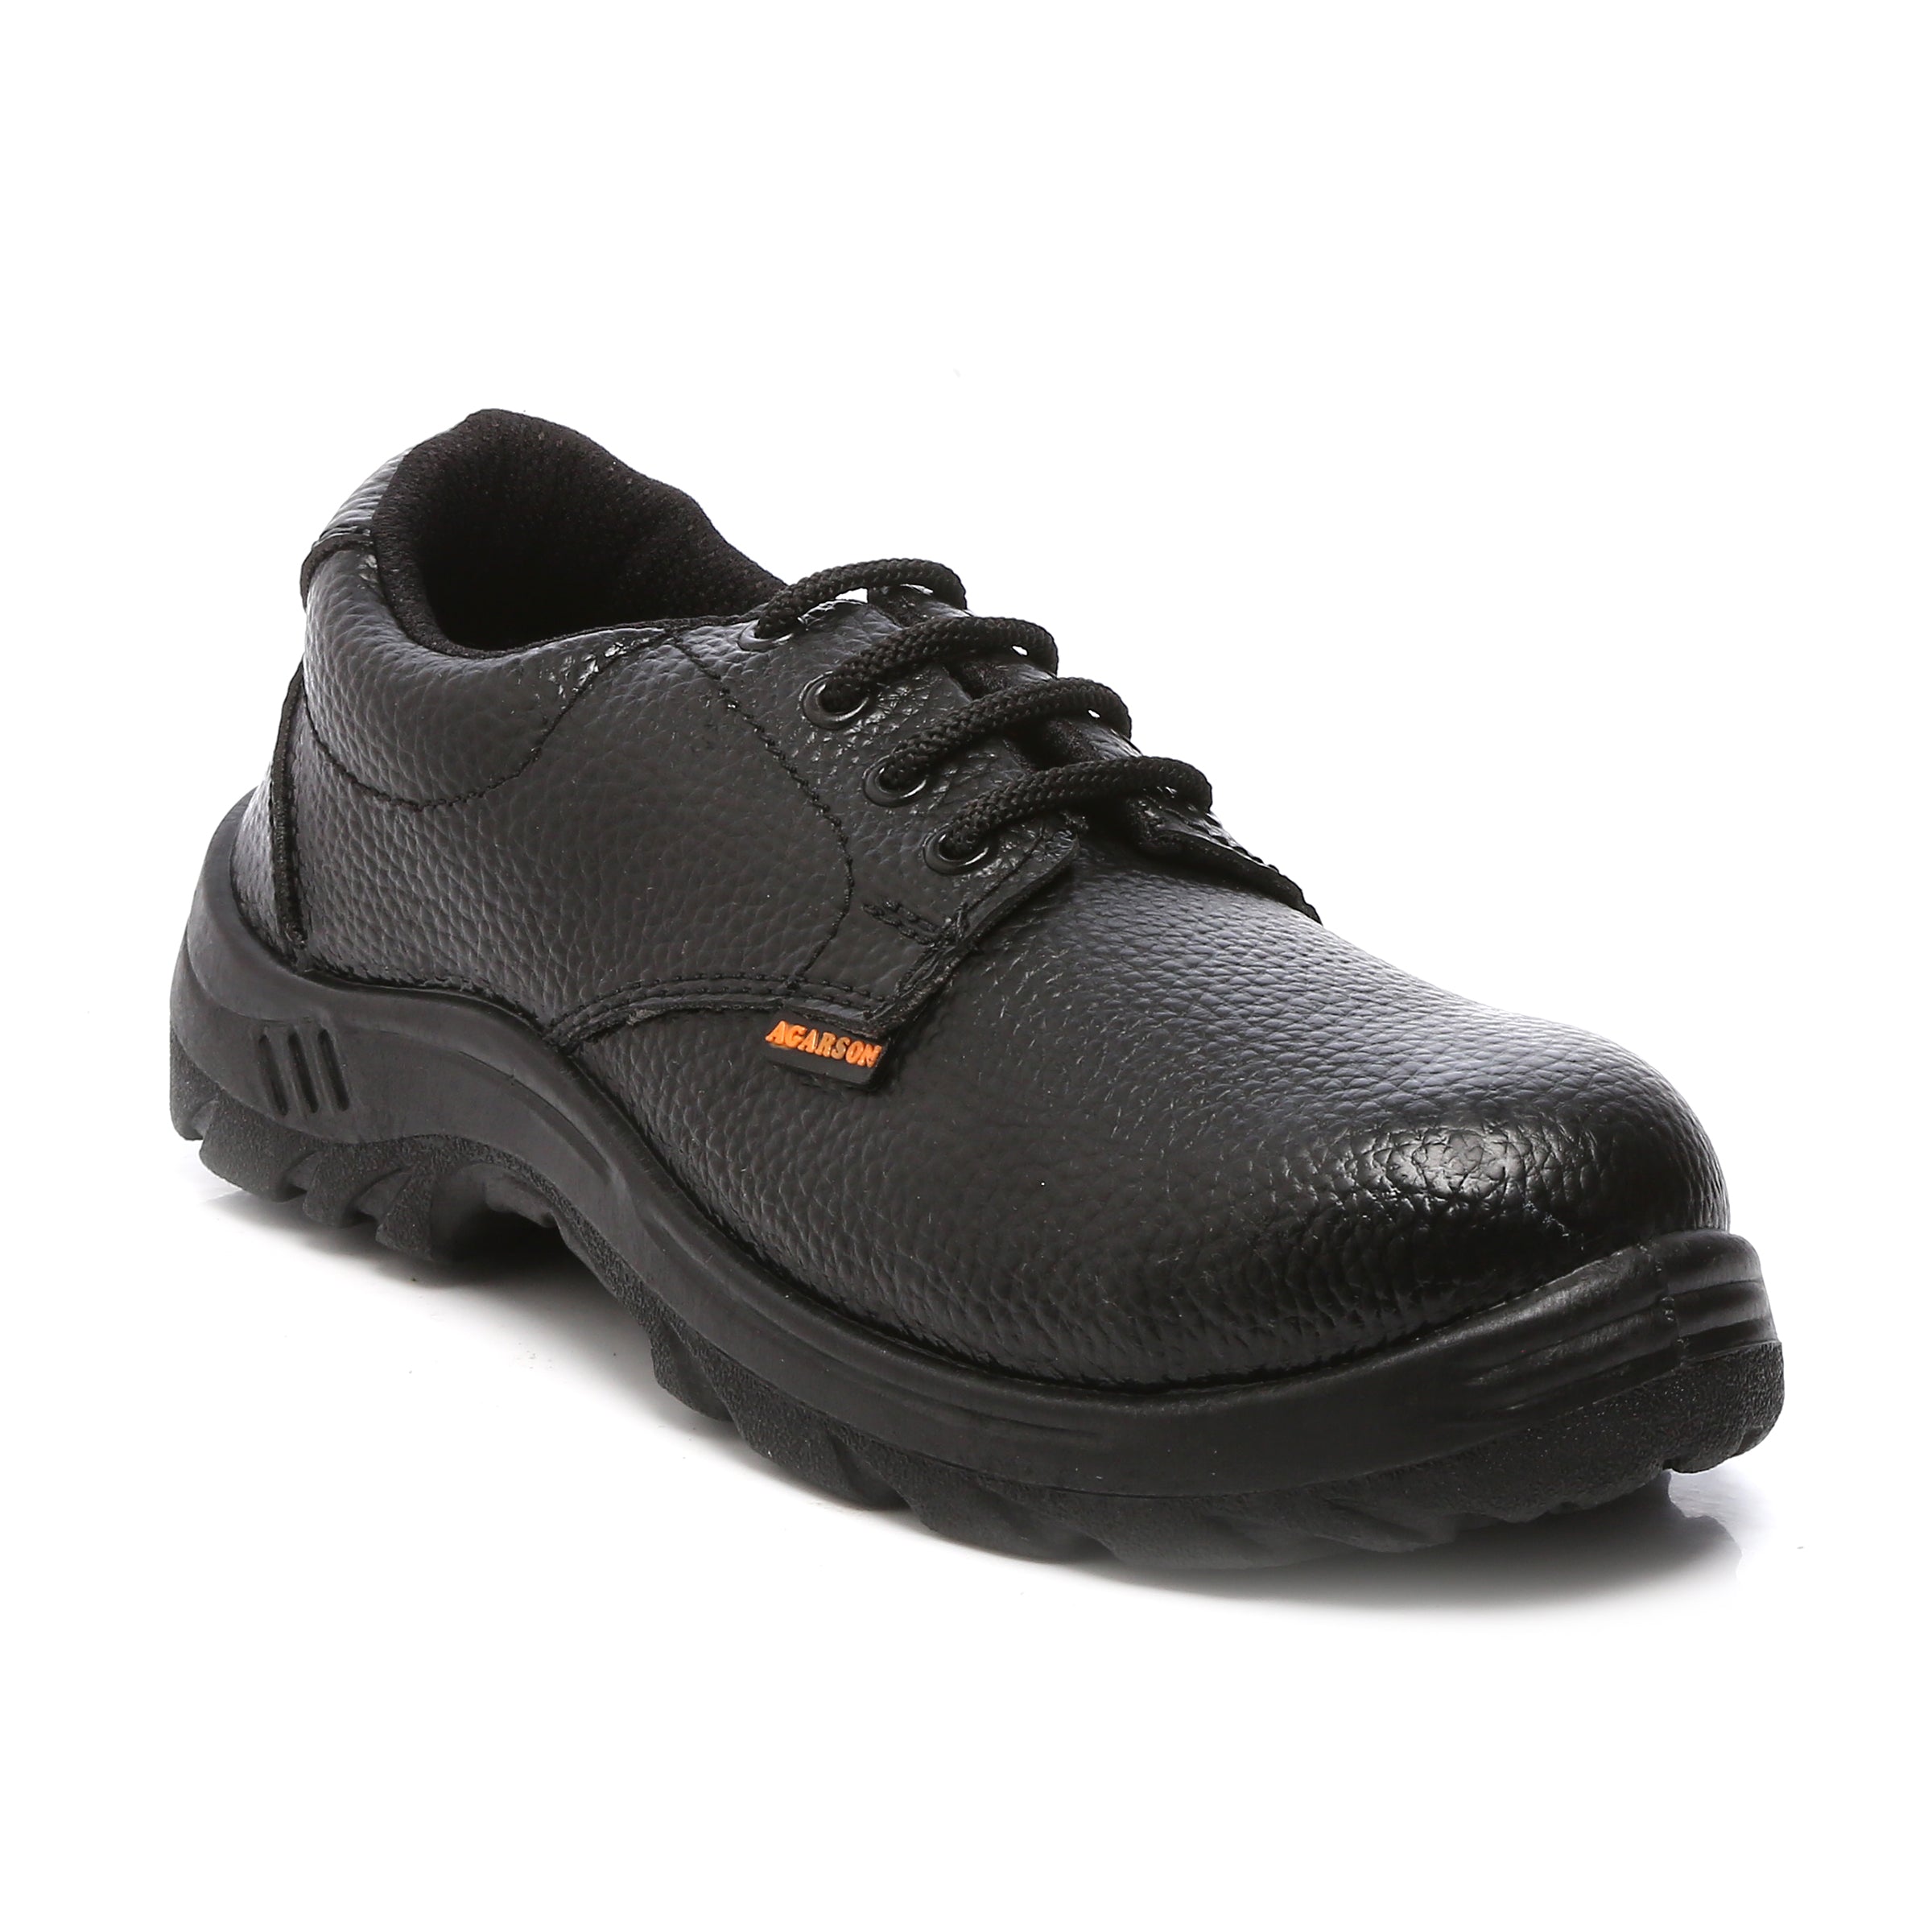 Boys Black Colour Leather Customized Casual School Shoes With Adjustable  Laces Insole Material: Rubber at Best Price in Jaipur | Aggarwal Polymers